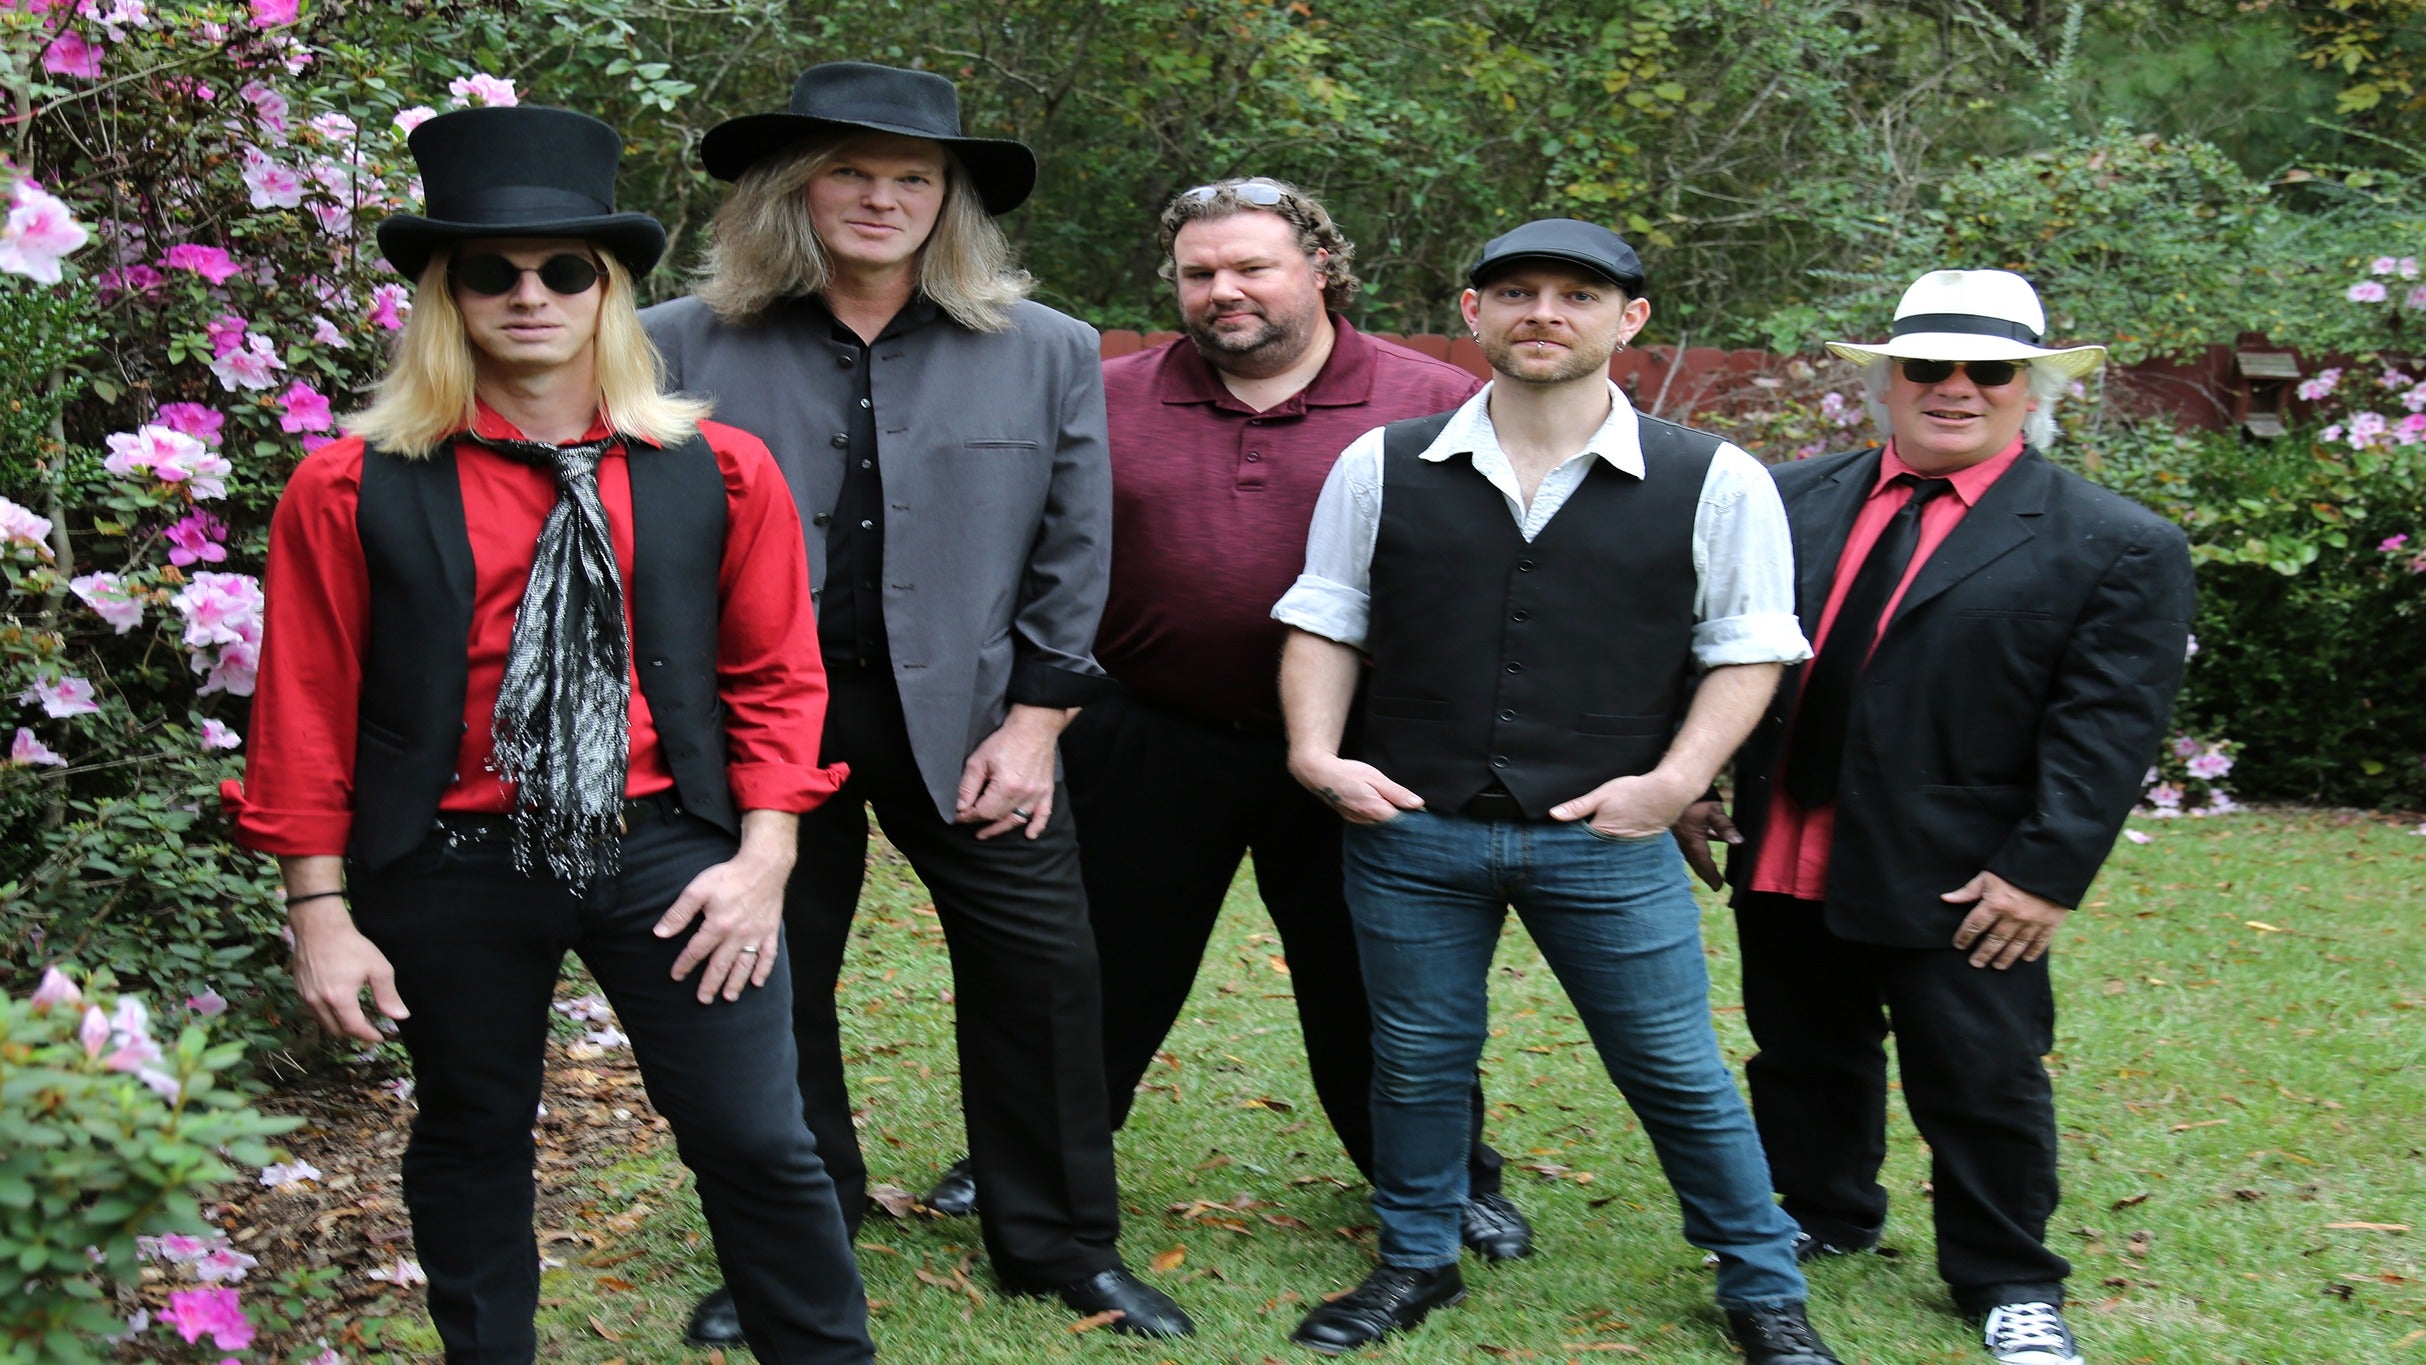 The Wildflowers - Tribute to Tom Petty & The Heartbreakers in North Myrtle Beach promo photo for Official Platinum presale offer code